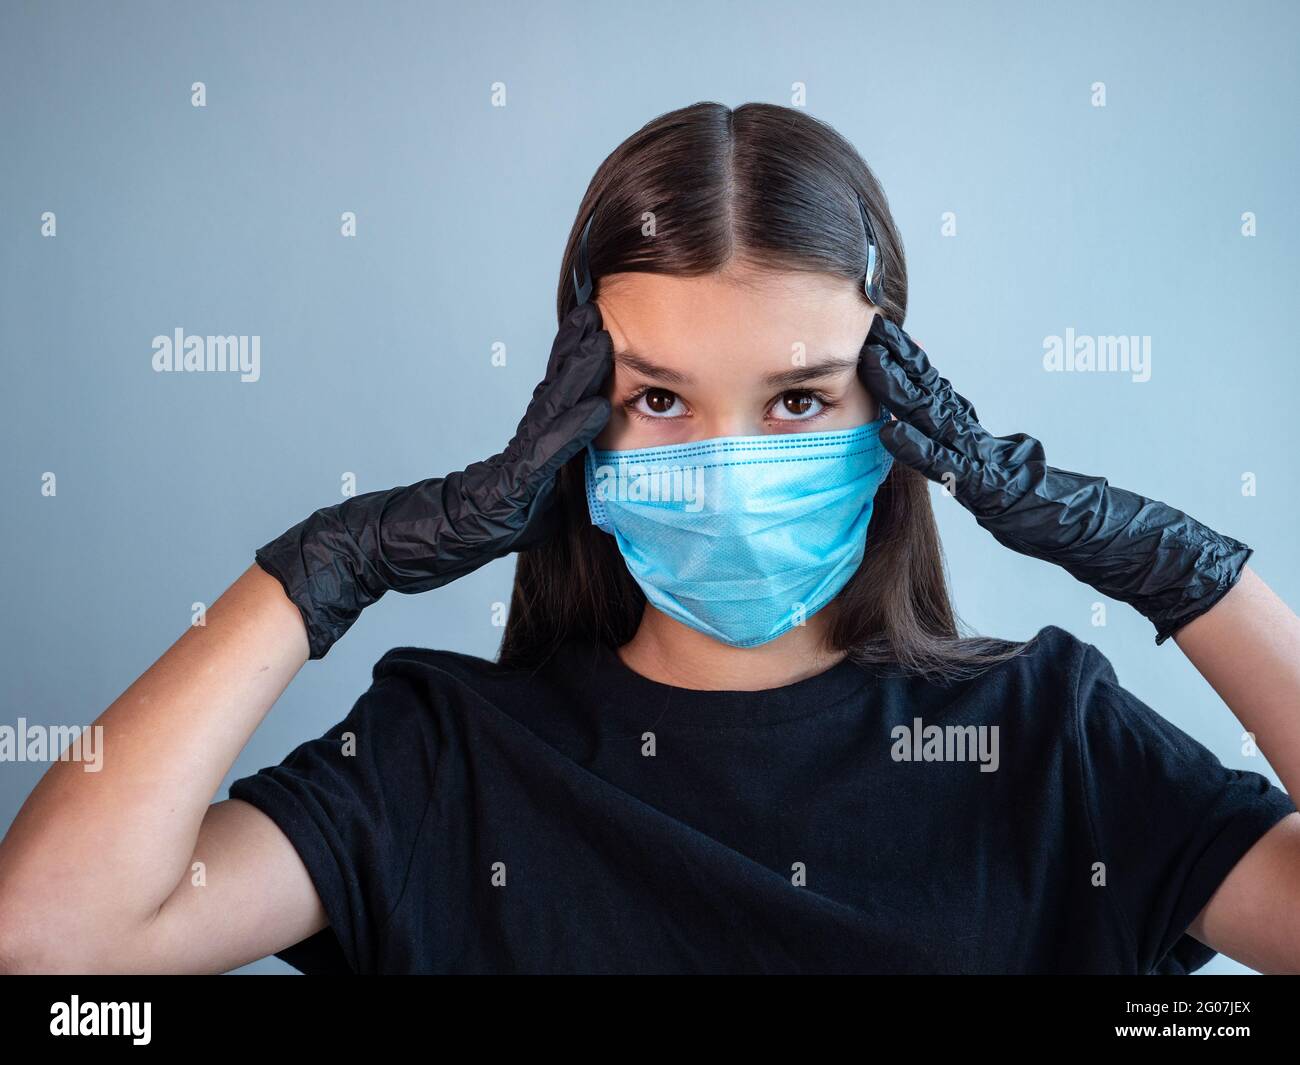 A female teenage girl in a blue protective medical face mask touching ...